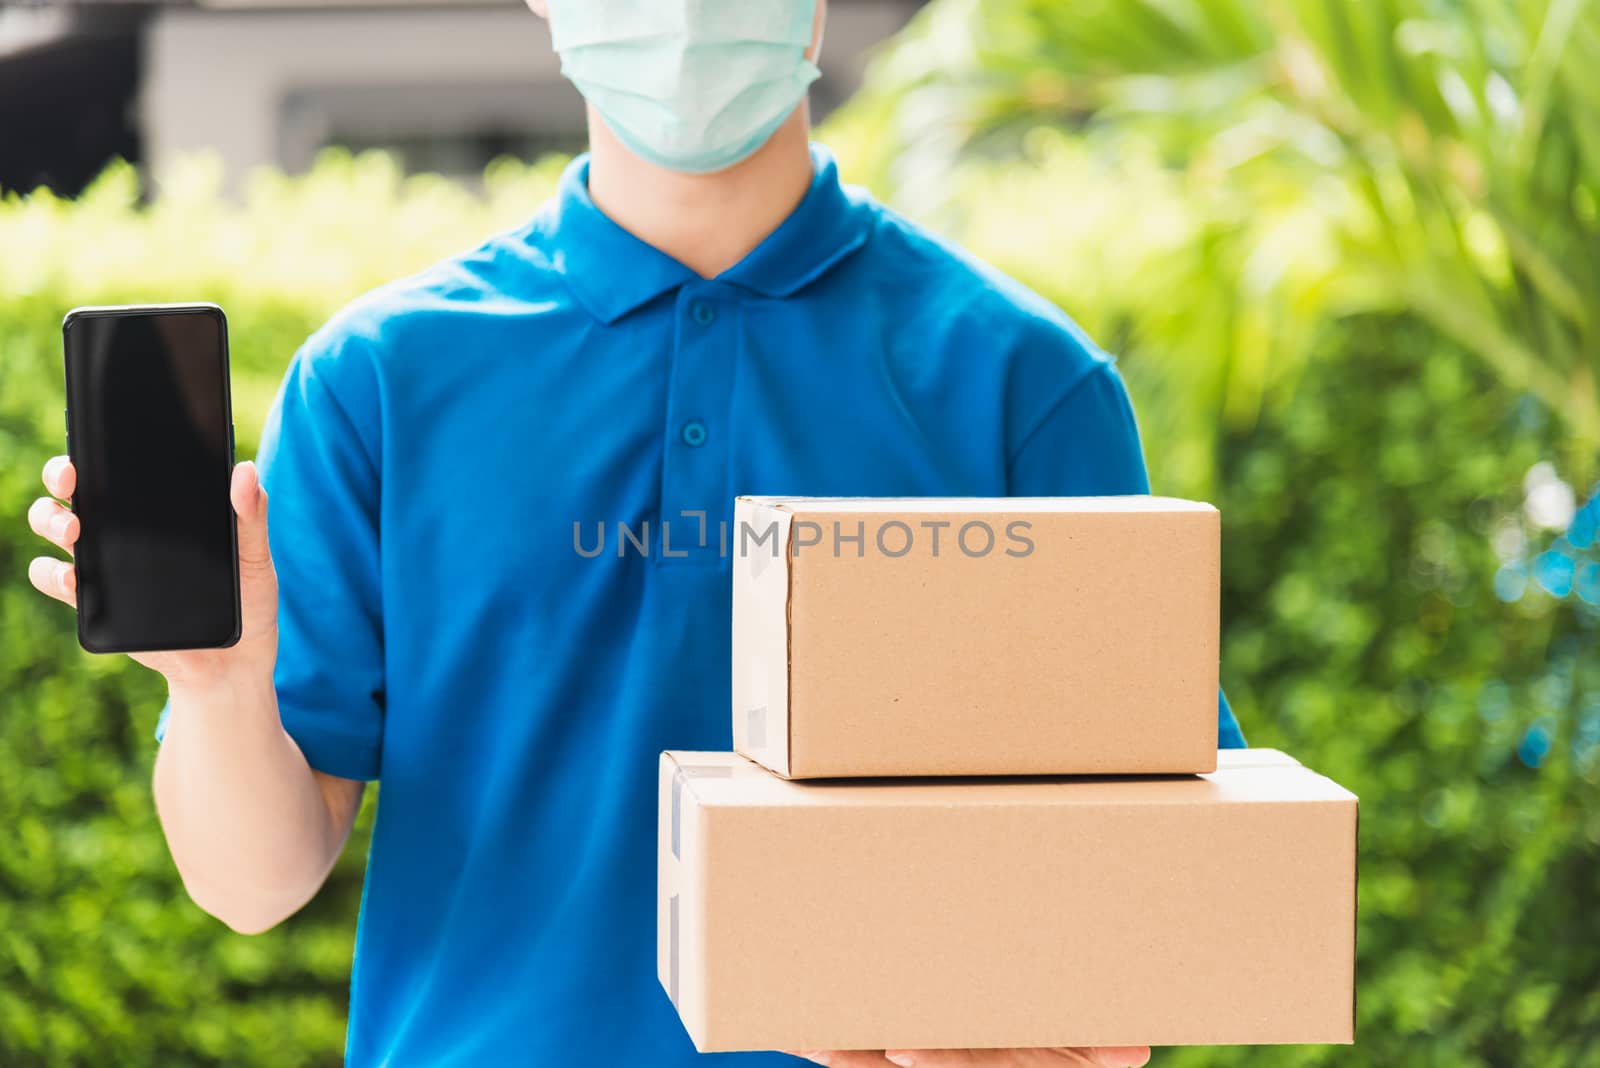 Asian delivery express courier young man giving boxes to customer he wears protective face mask at front home and show mobile phone blank screen, under curfew quarantine pandemic coronavirus COVID-19